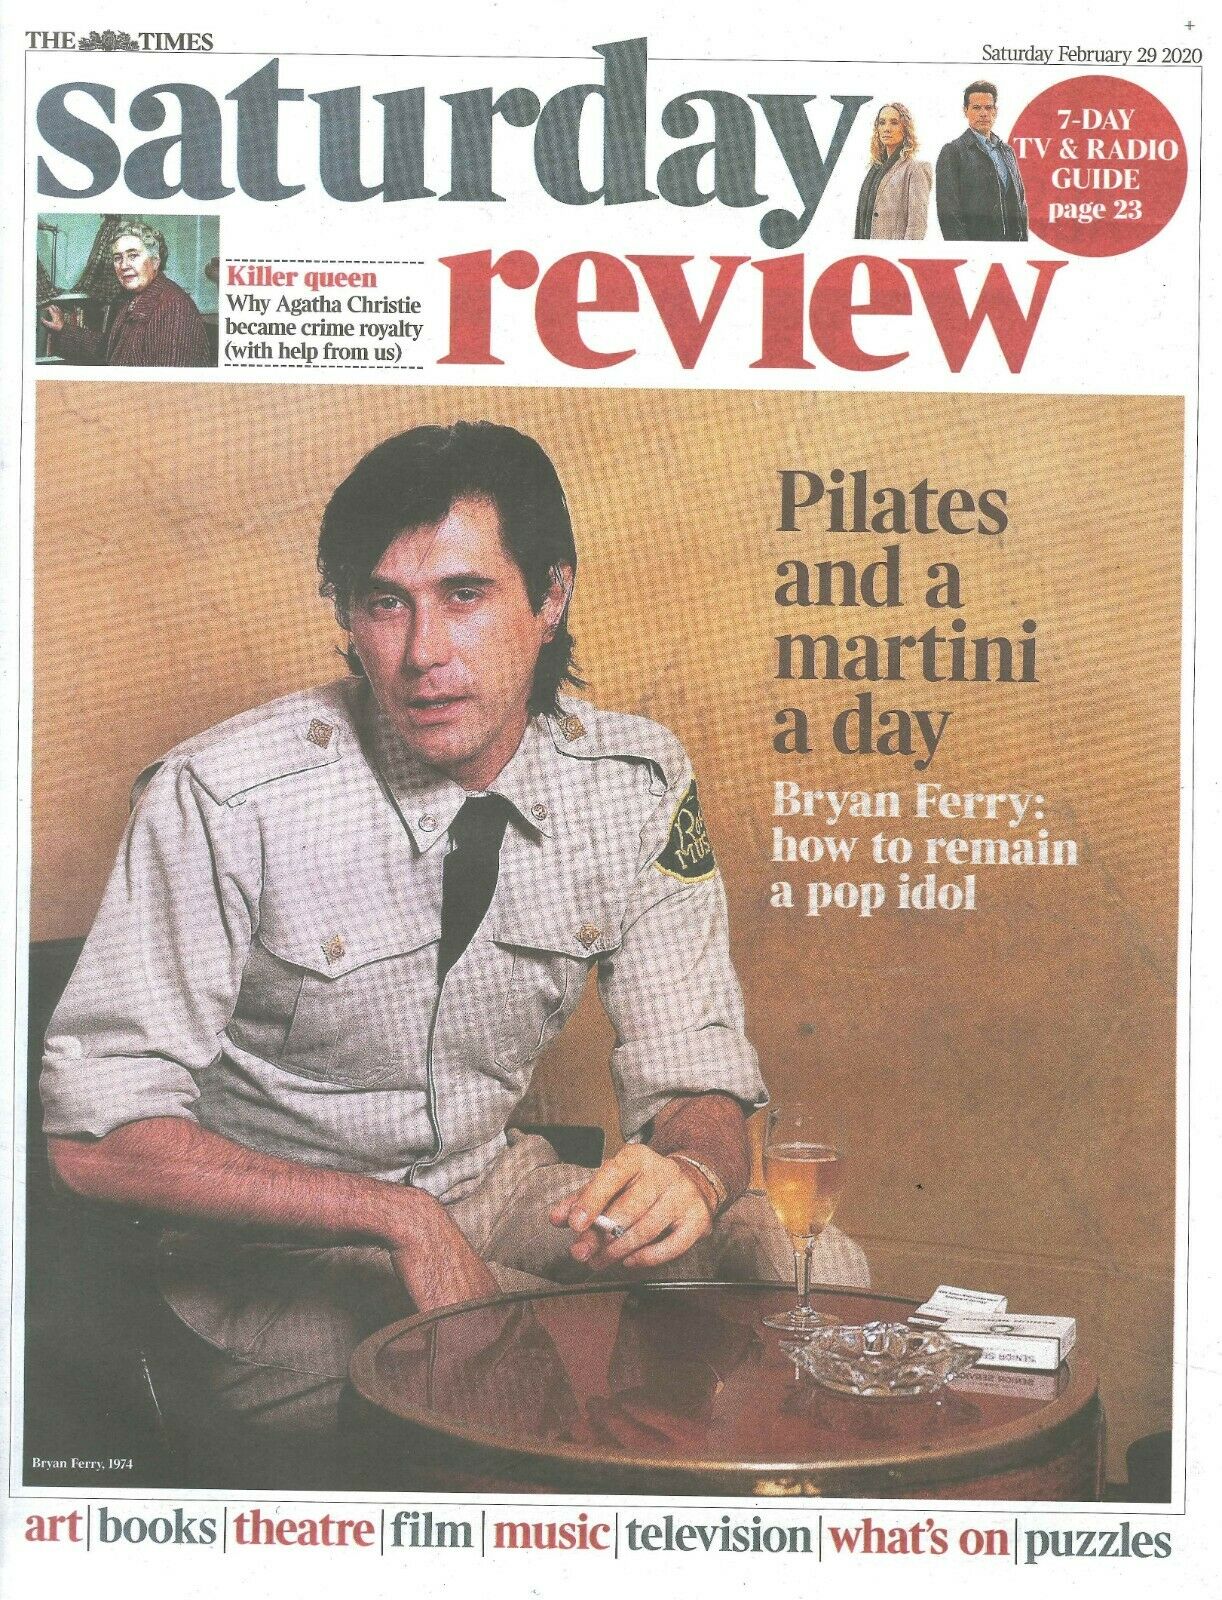 Happy birthday to Bryan Ferry, 75 today! 

How\s the diet going Bry? 